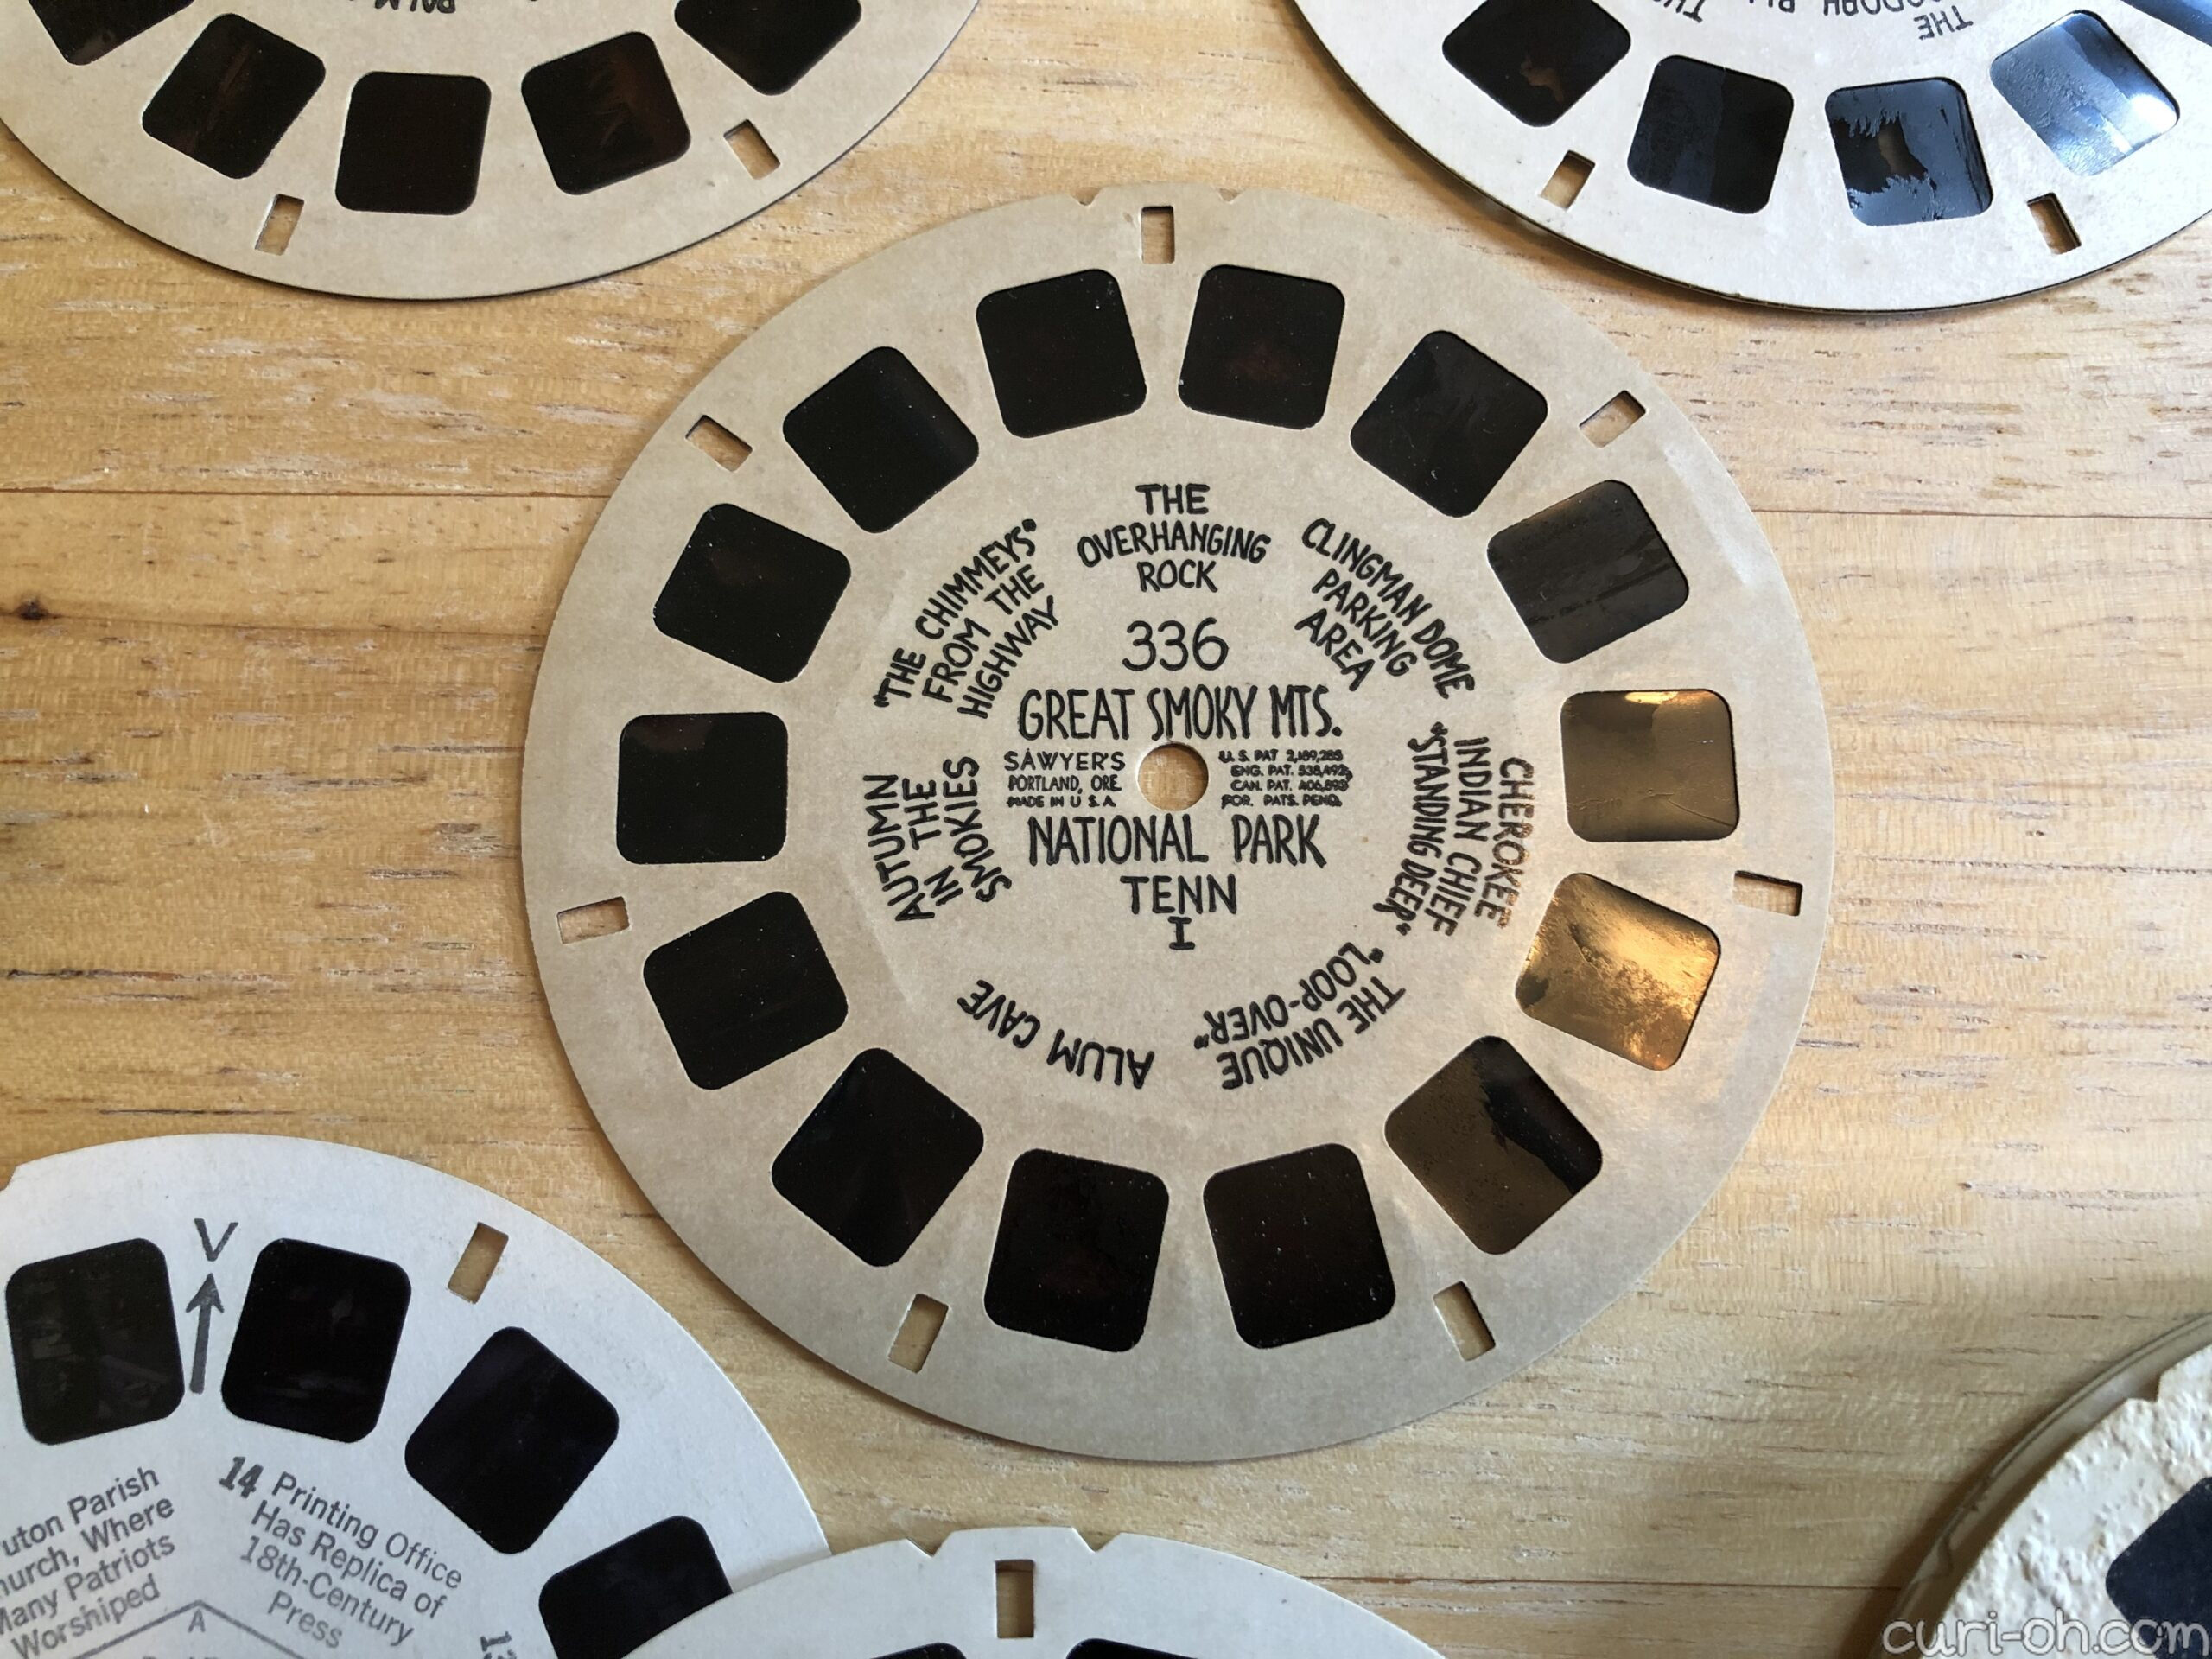 What's Inside a View-Master? And How to Clean One – Curi-Oh!